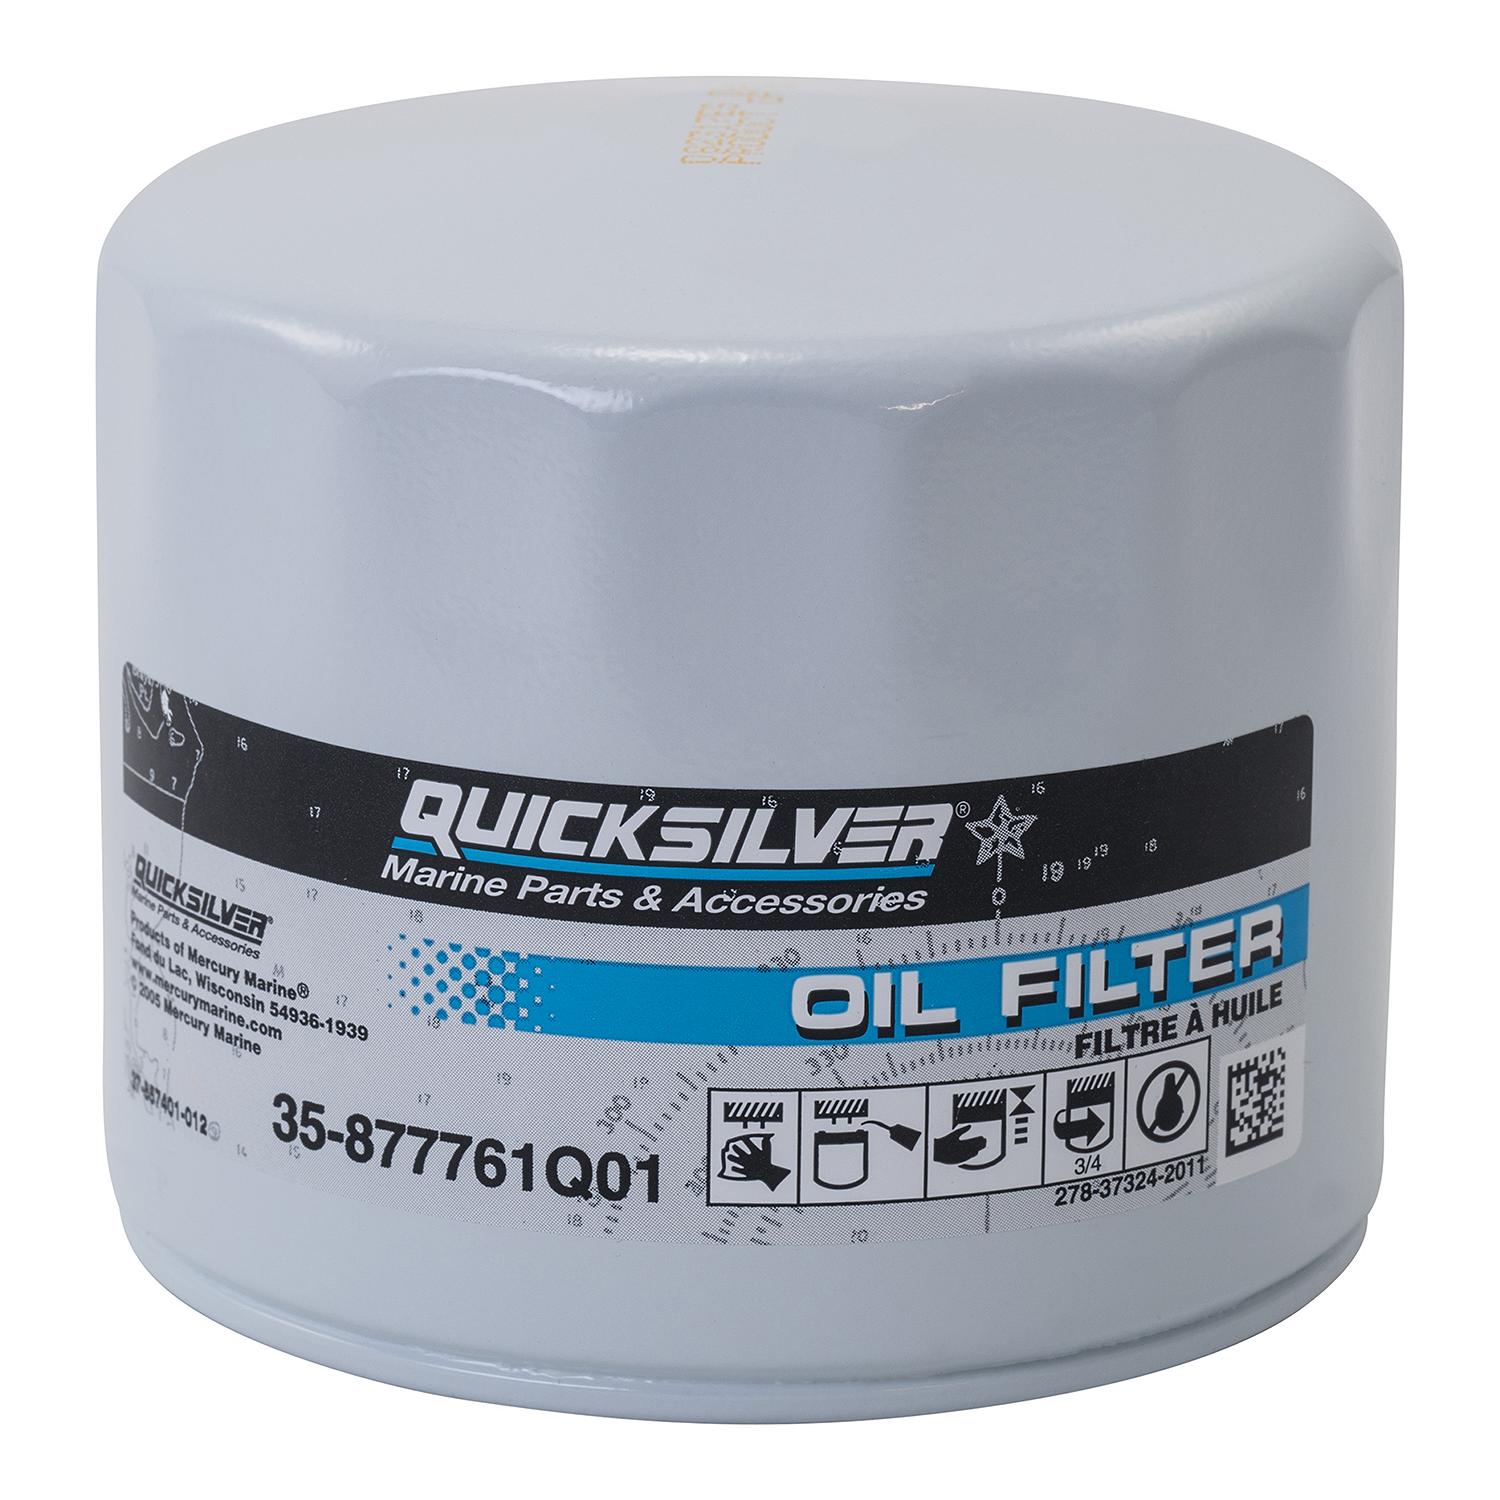 Quicksilver 877761Q01 Oil Filter for Select Mercury and Mariner 75-115 Hp Outboards and 150 Hp EFI 4-Stroke Outboards